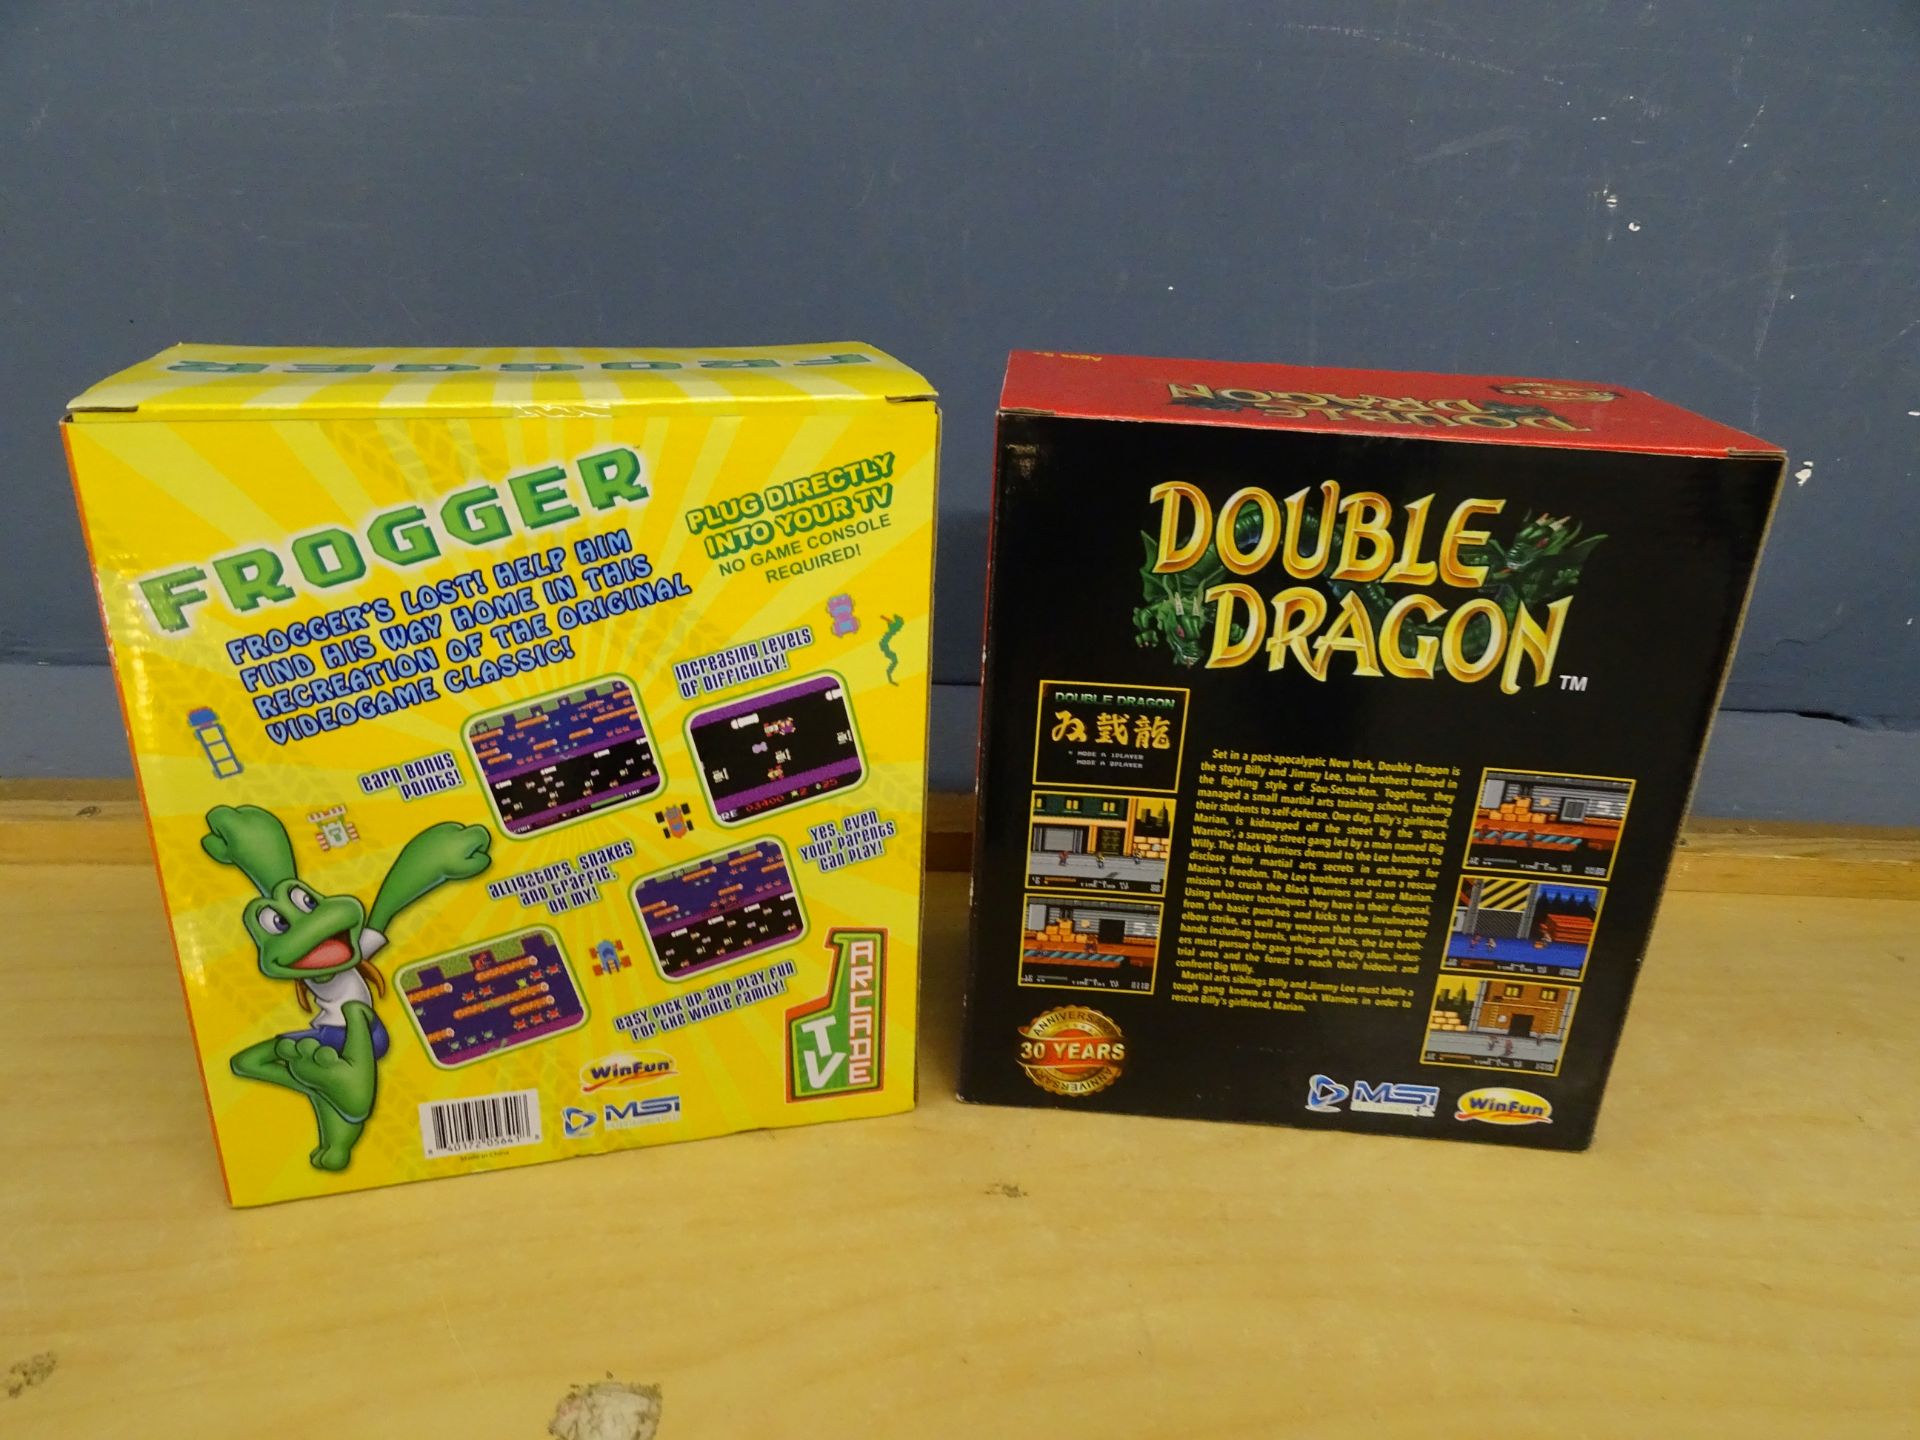 New and sealed Frogger and Double Dragon plug & play arcade TV games - Image 2 of 2